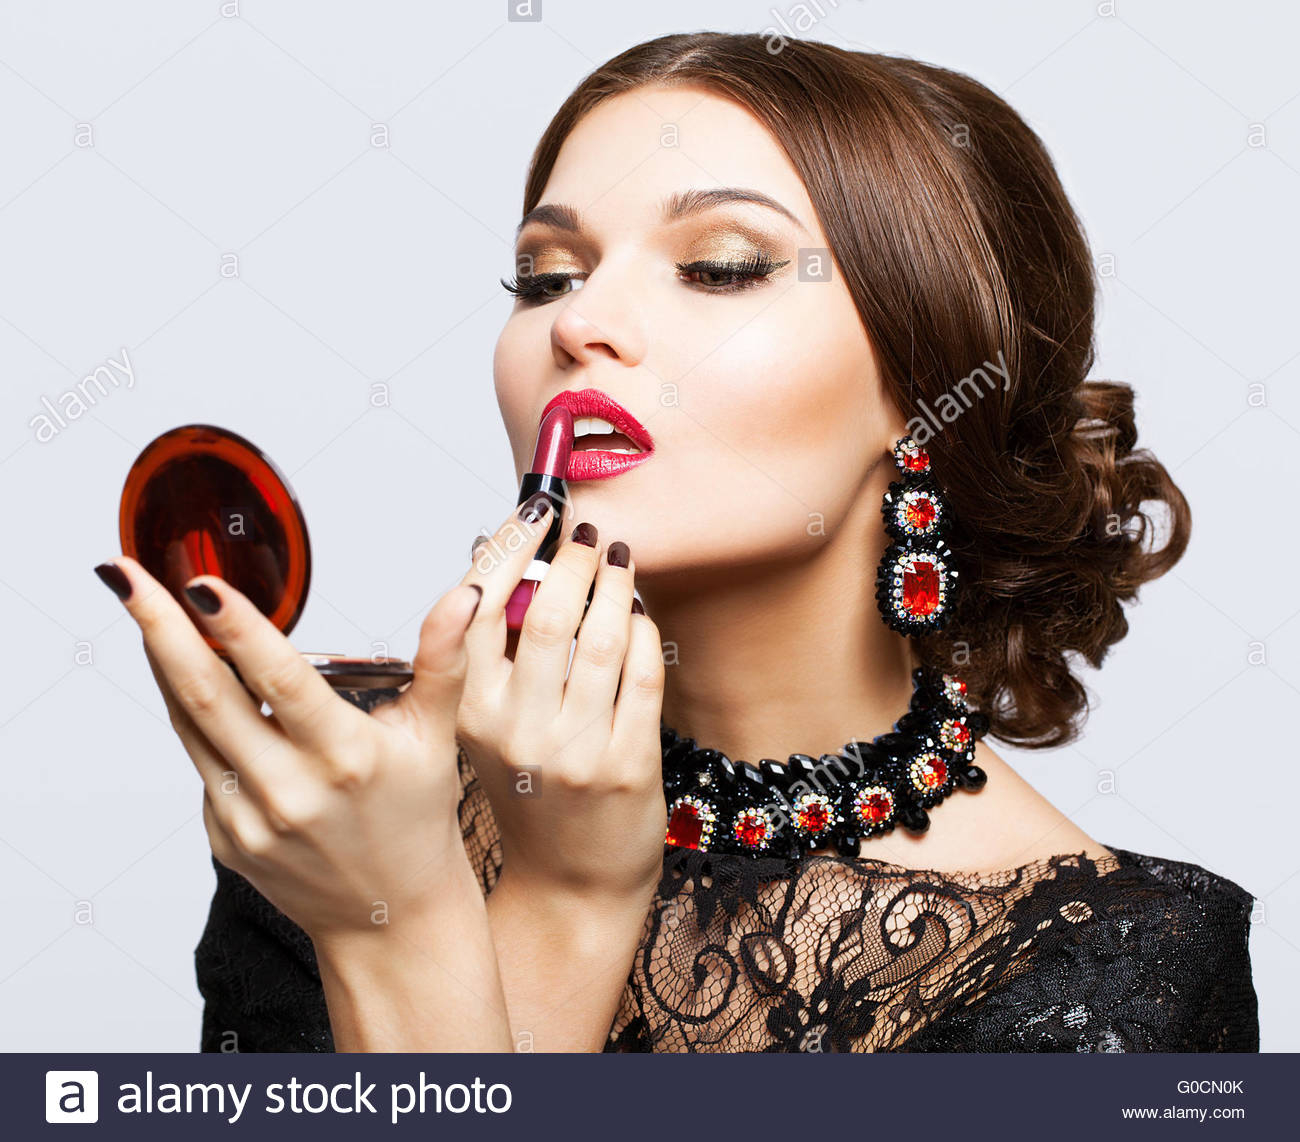 Eye Makeup For Black Dress Makeup Of Young Beautiful Brunette Woman In Black Dress With